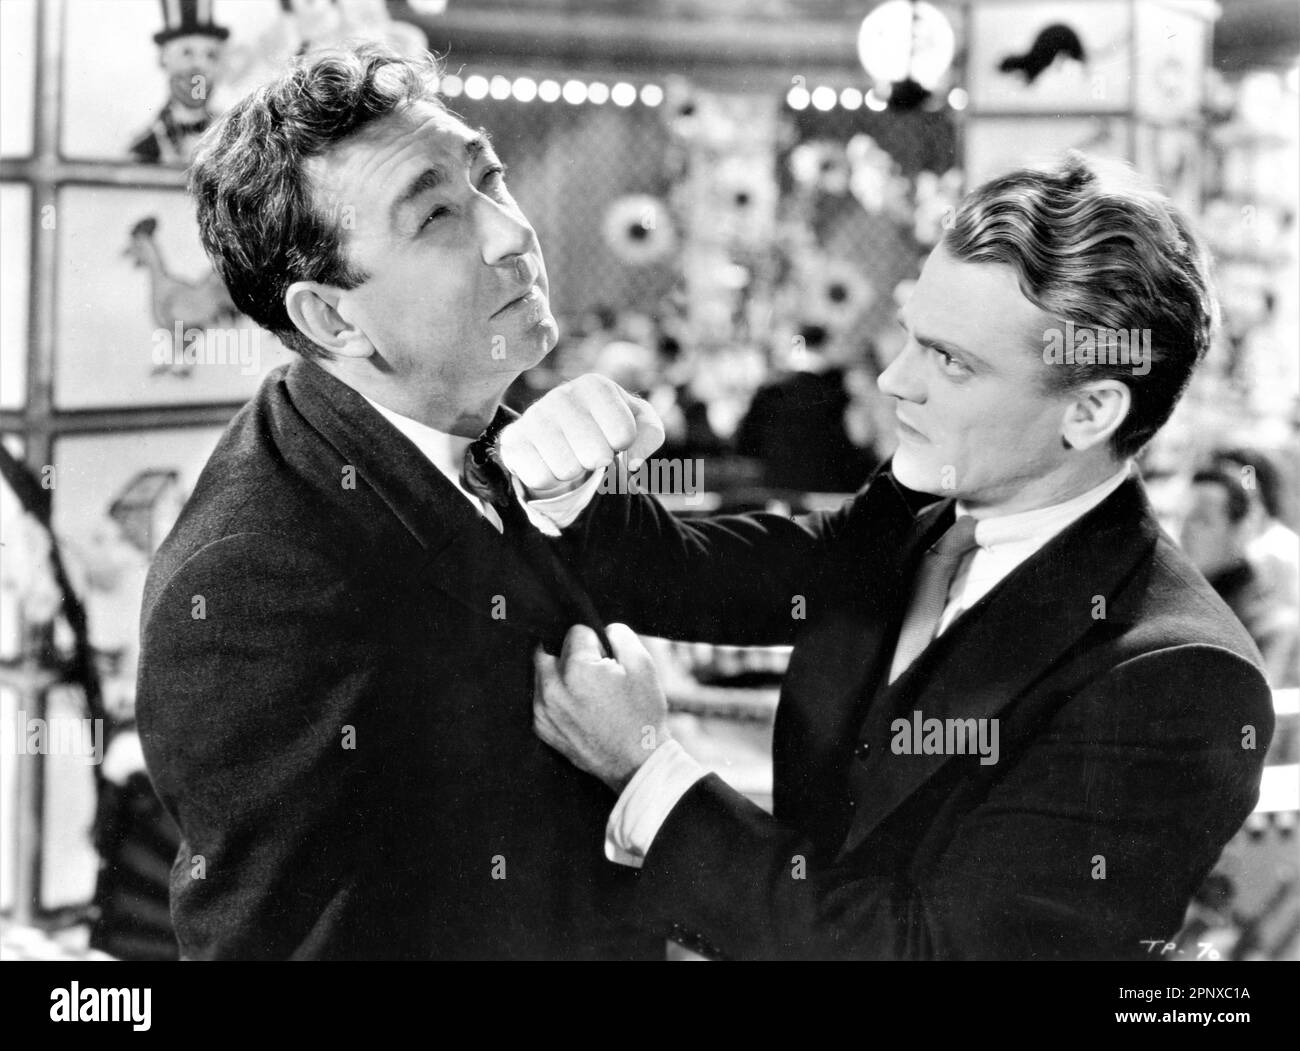 DAVID LANDAU and JAMES CAGNEY in TAXI 1931 director ROY DEL RUTH based on the play by Kenyon Nicholson adaptation and dialogue Kubec Glasmon and John Bright A Warner Bros. and Vitaphone Picture Stock Photo